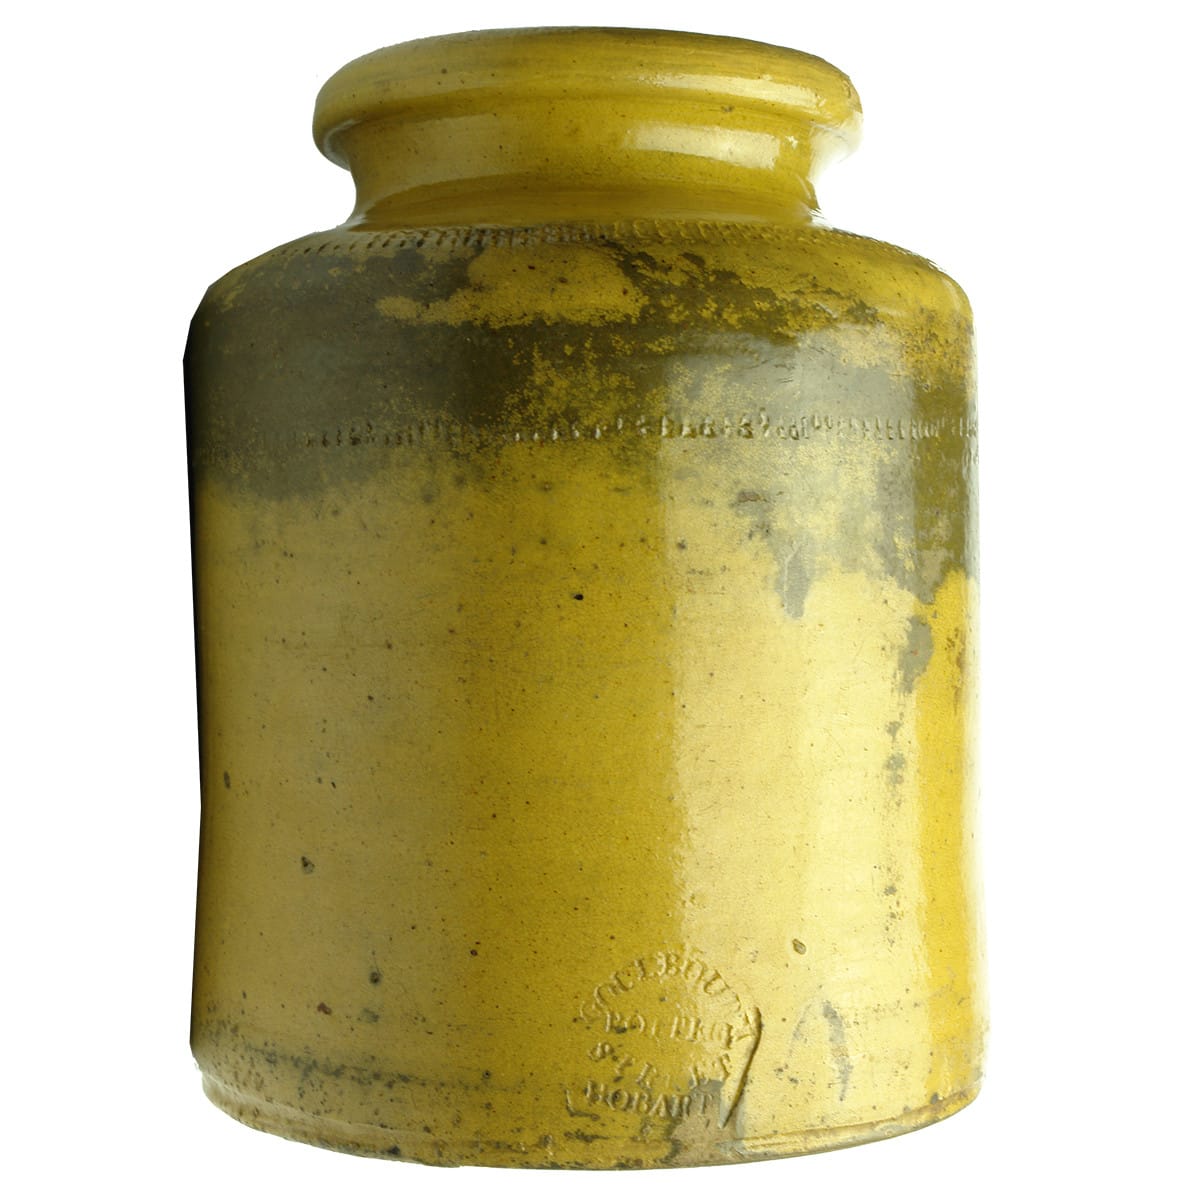 Pottery. Goulbourn Street Pottery, Hobart. All Yellow. 182 mm. (Tasmania)